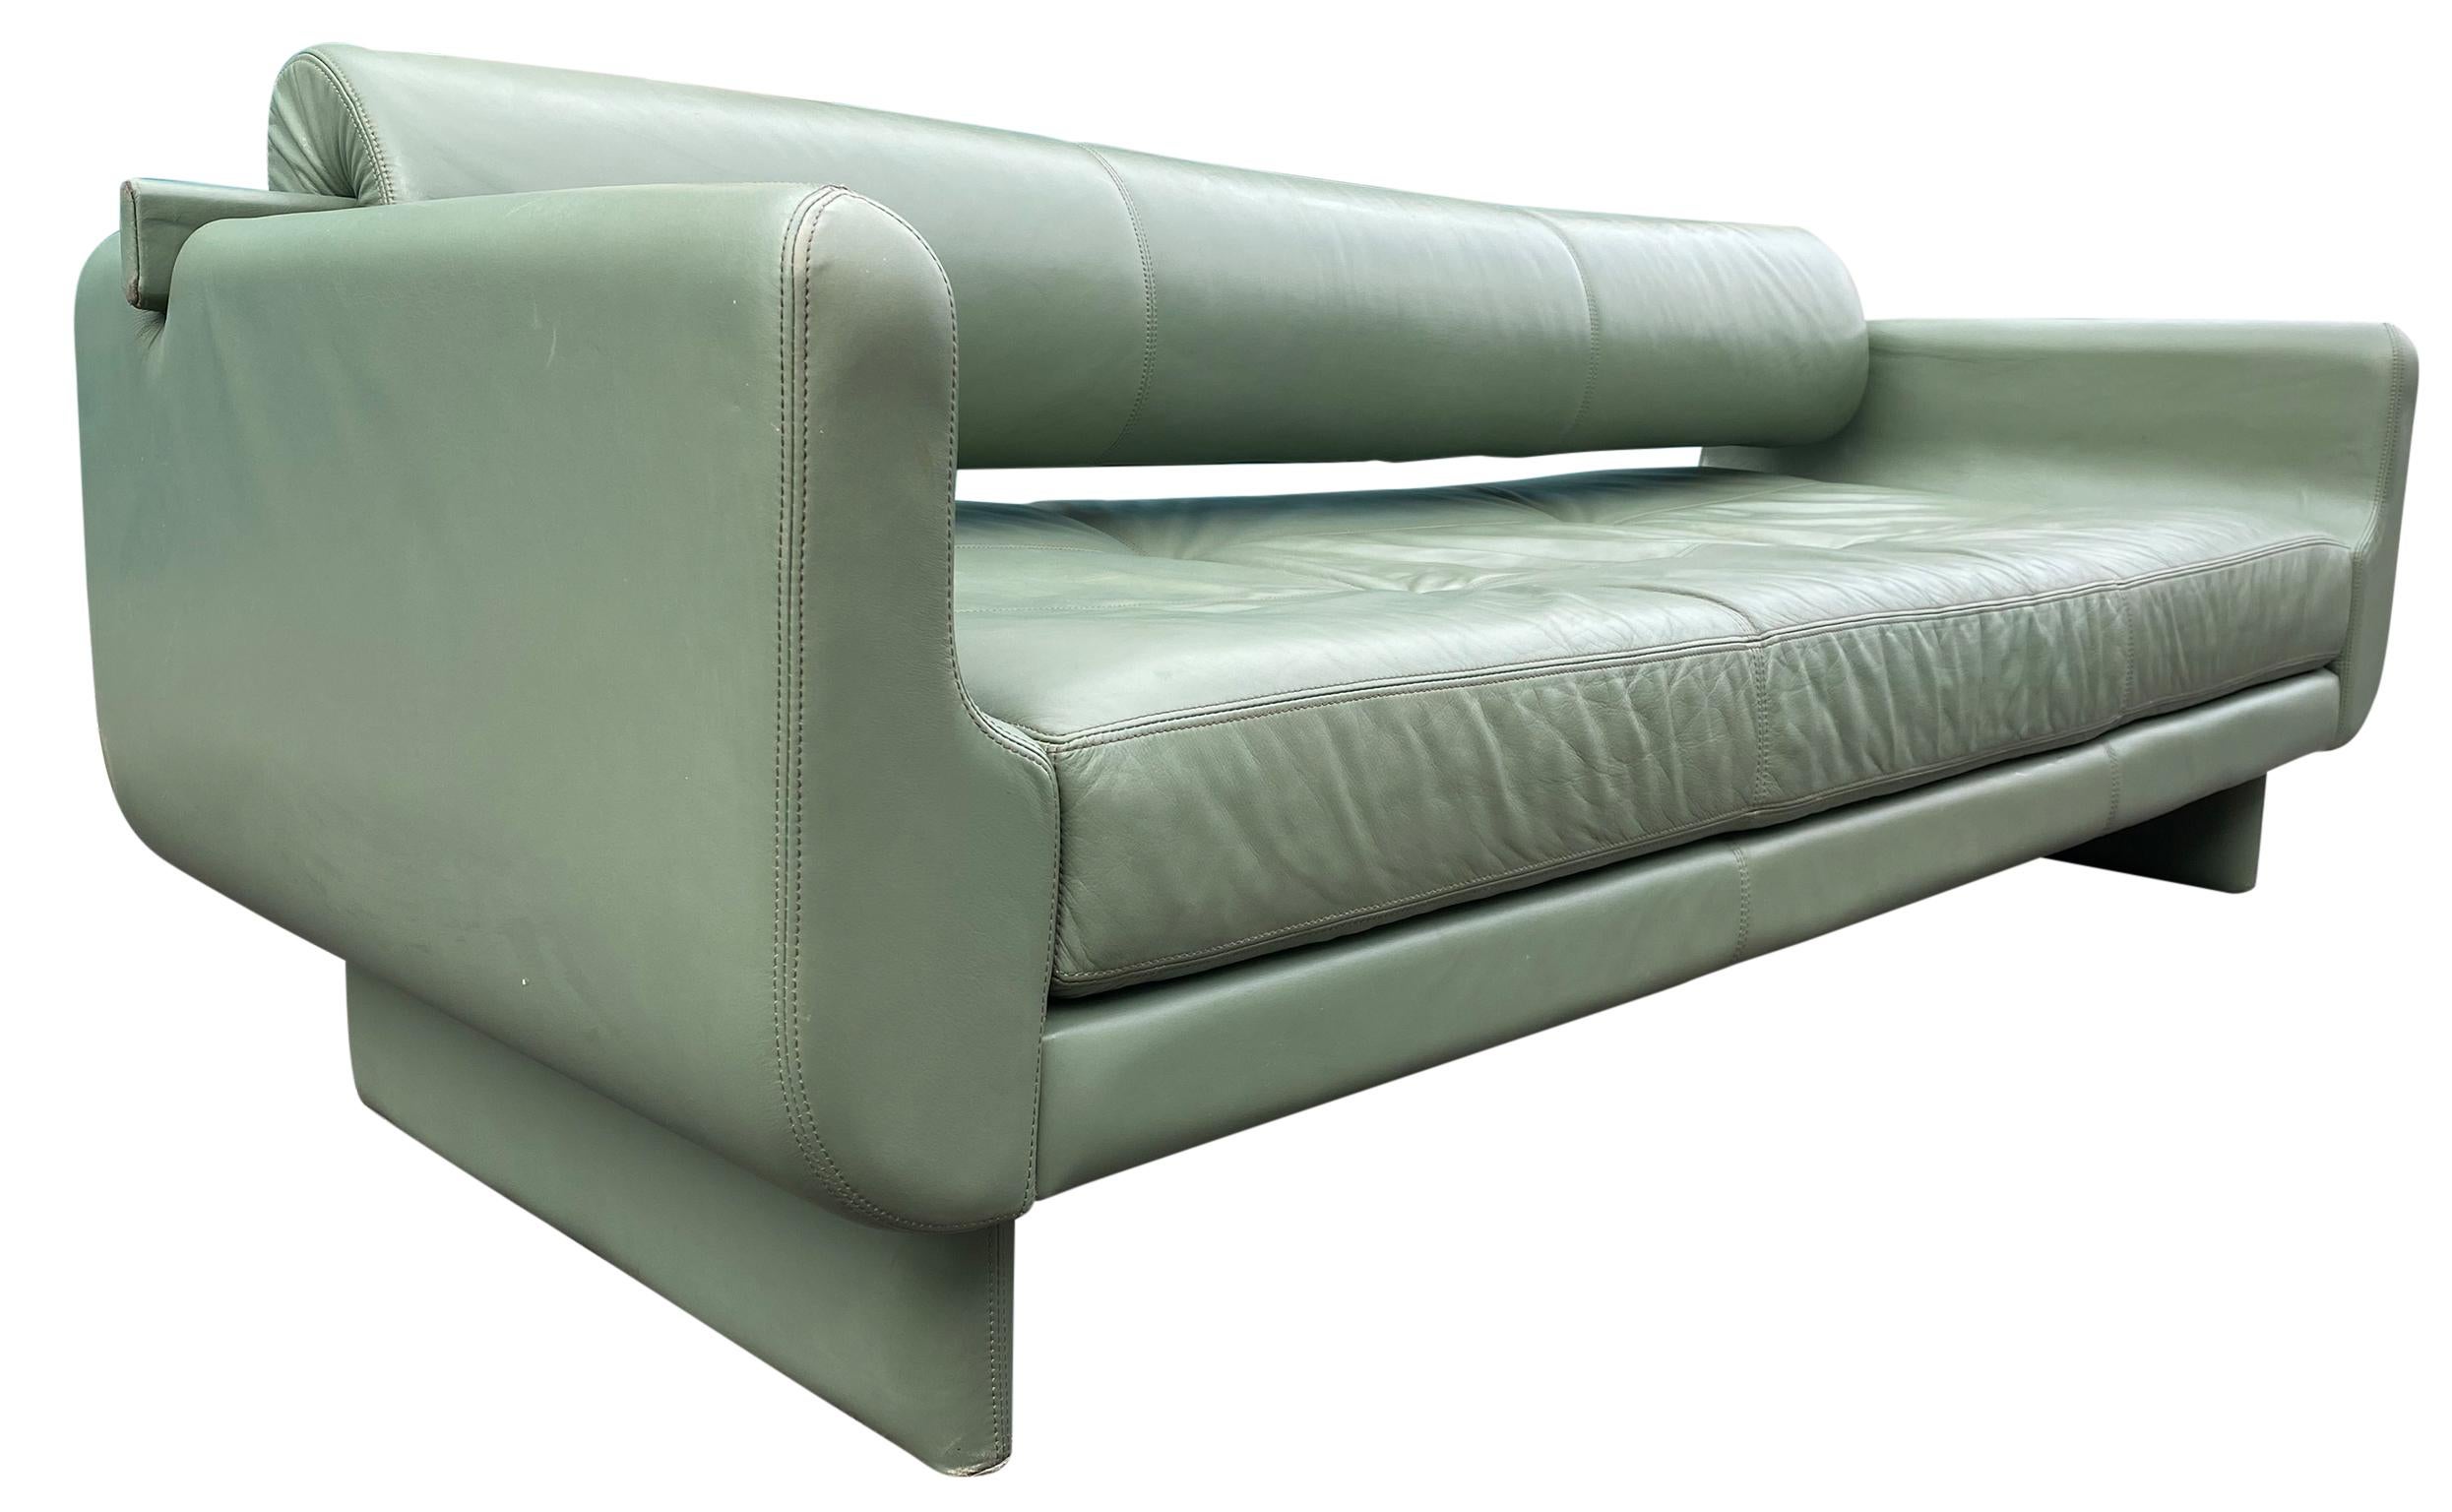 American Beautiful Leather Matinee Daybed Sofa by Vladimir Kagan Sage Green Leather